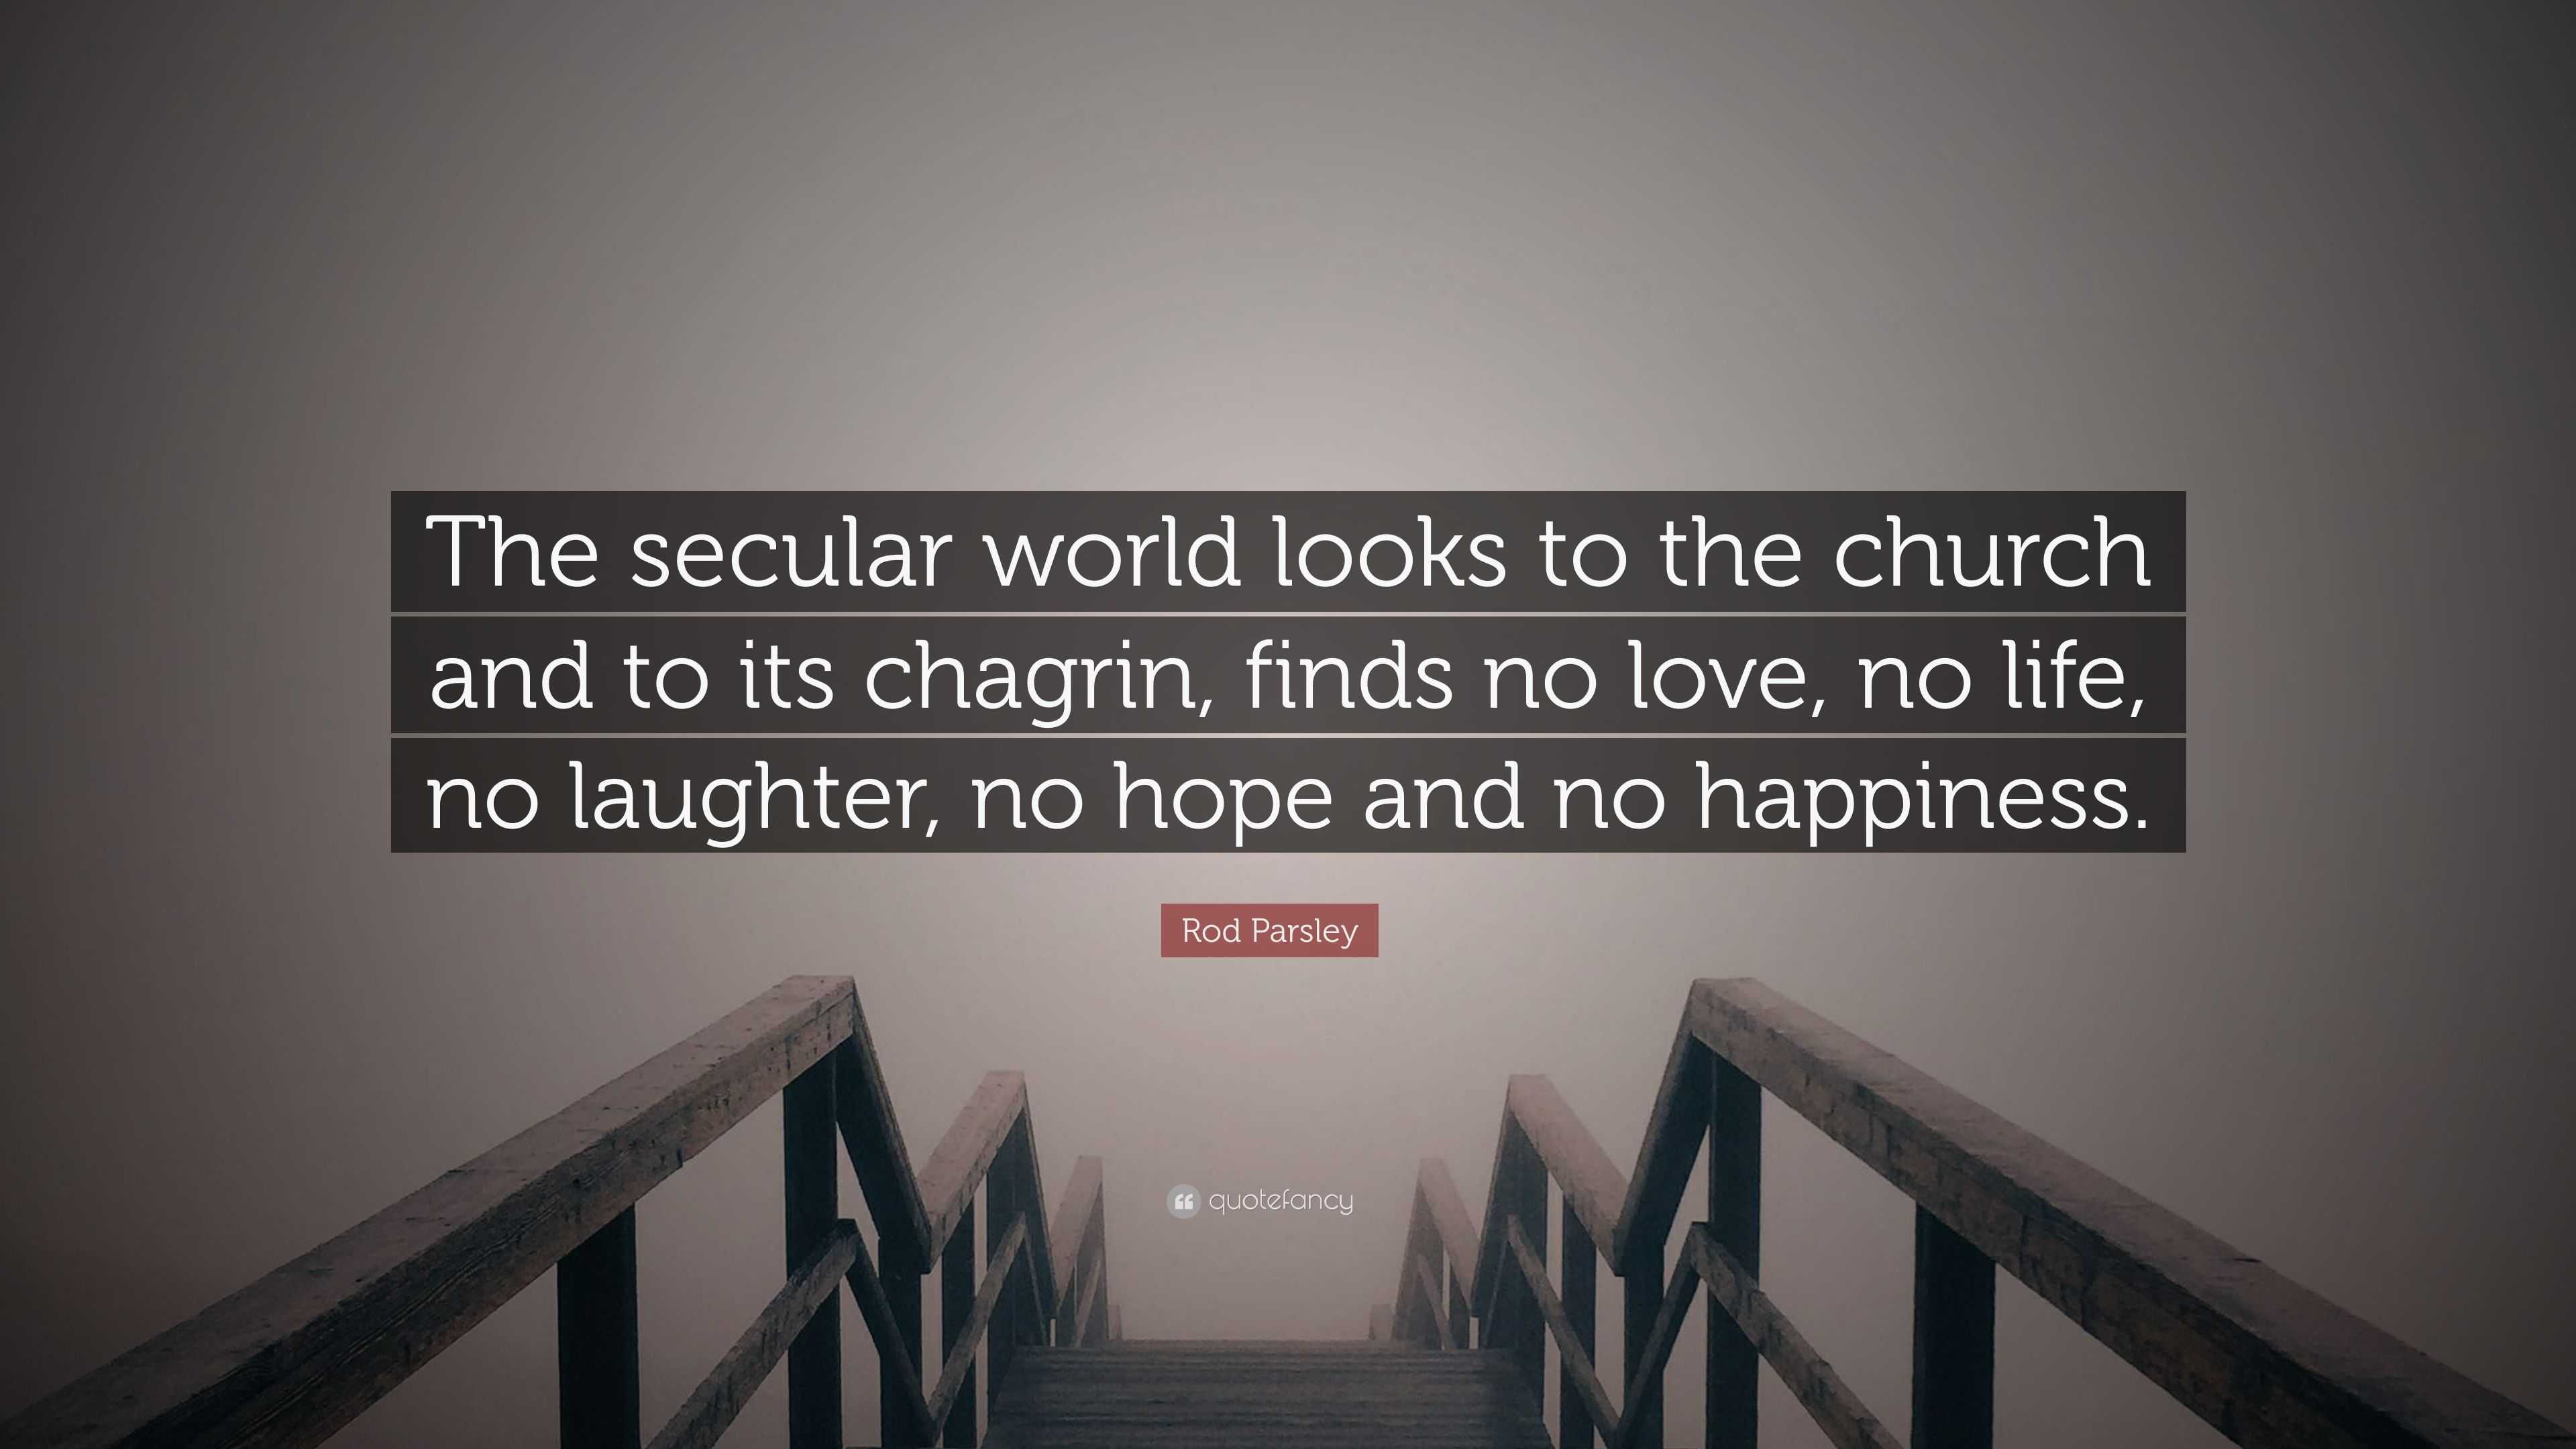 Rod Parsley Quote “The secular world looks to the church and to its chagrin